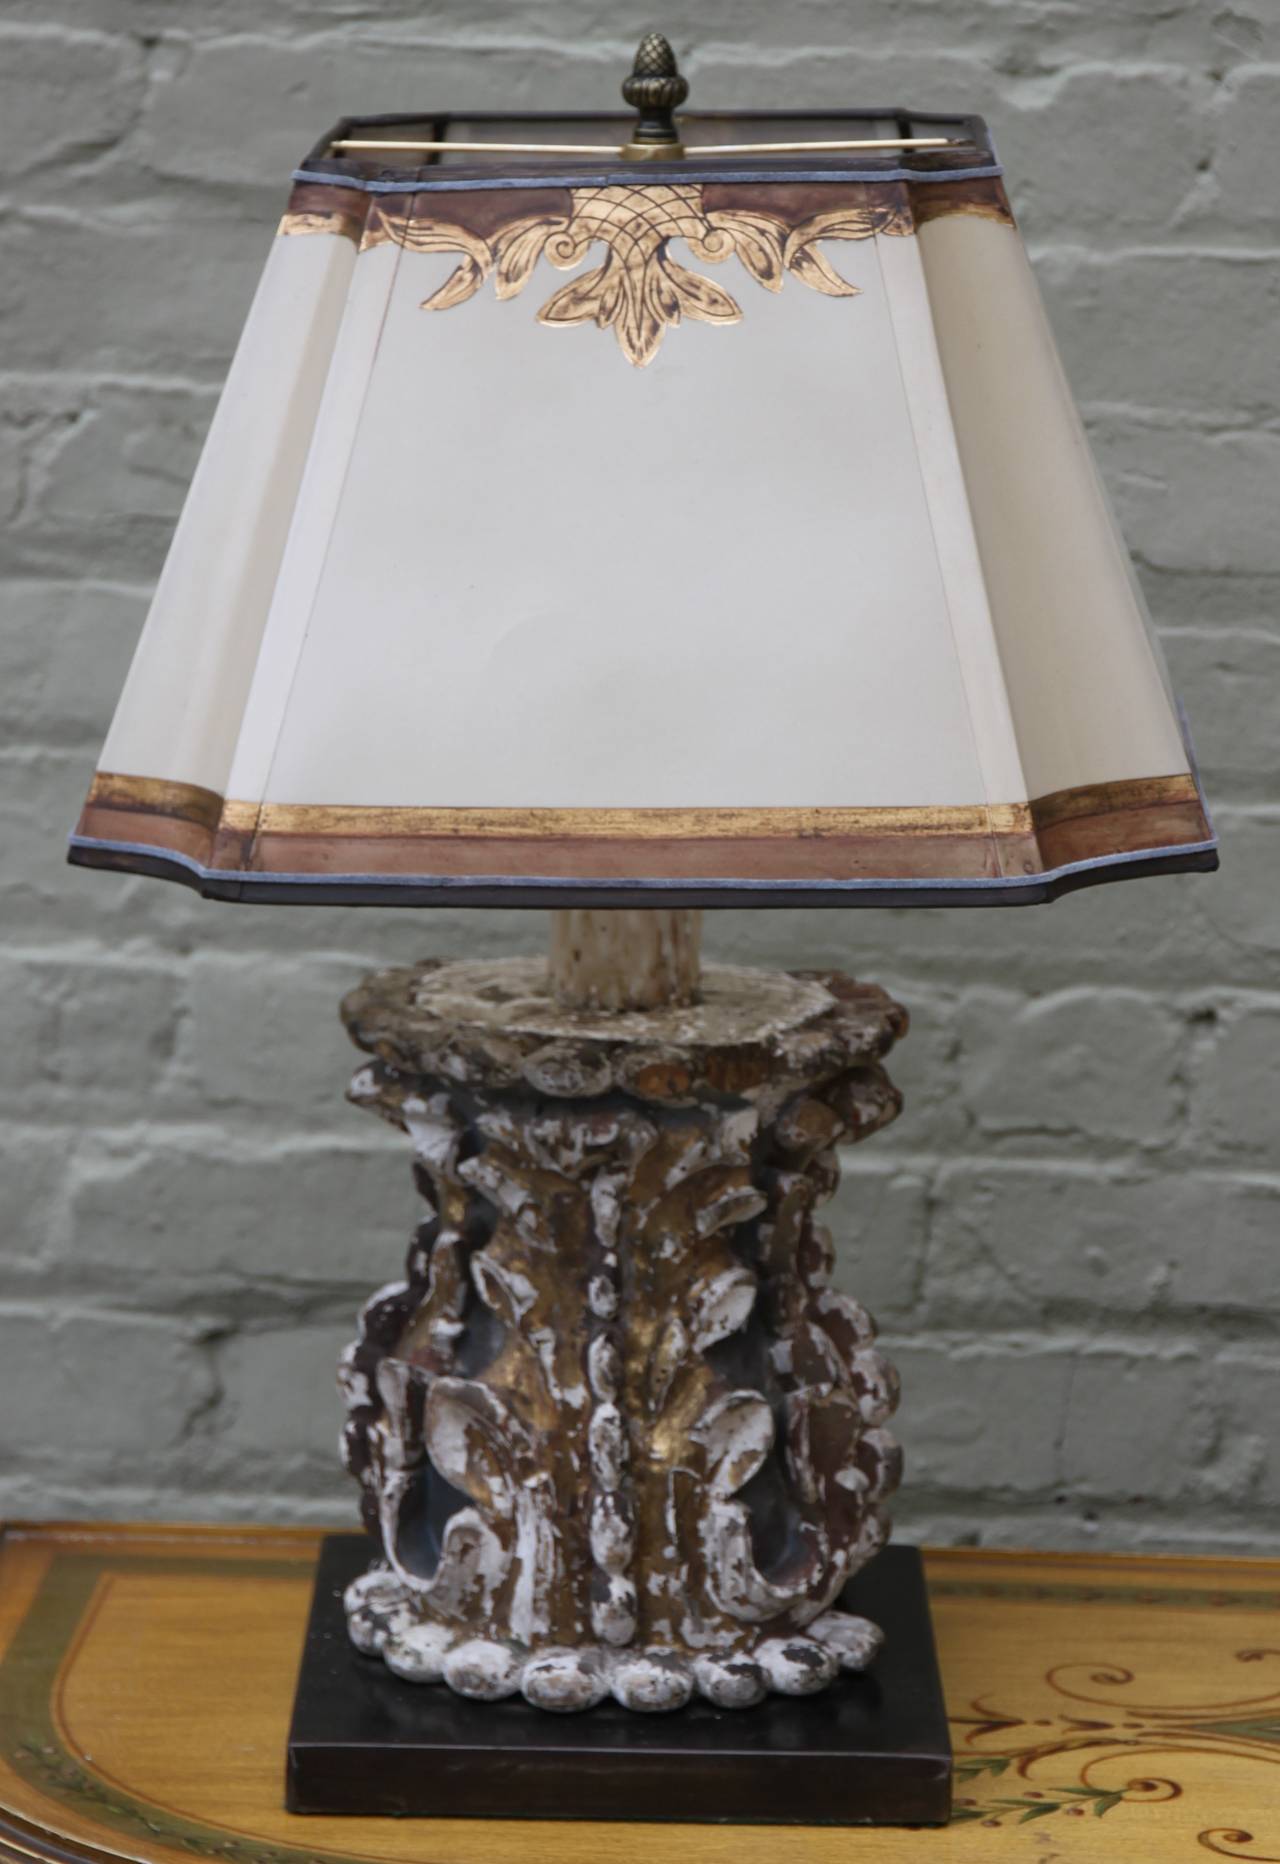 Pair of Italian carved painted and parcel-gilt architectural pieces mounted on steel bases and wired into lamps. Crowned with hand-painted parchment shades.